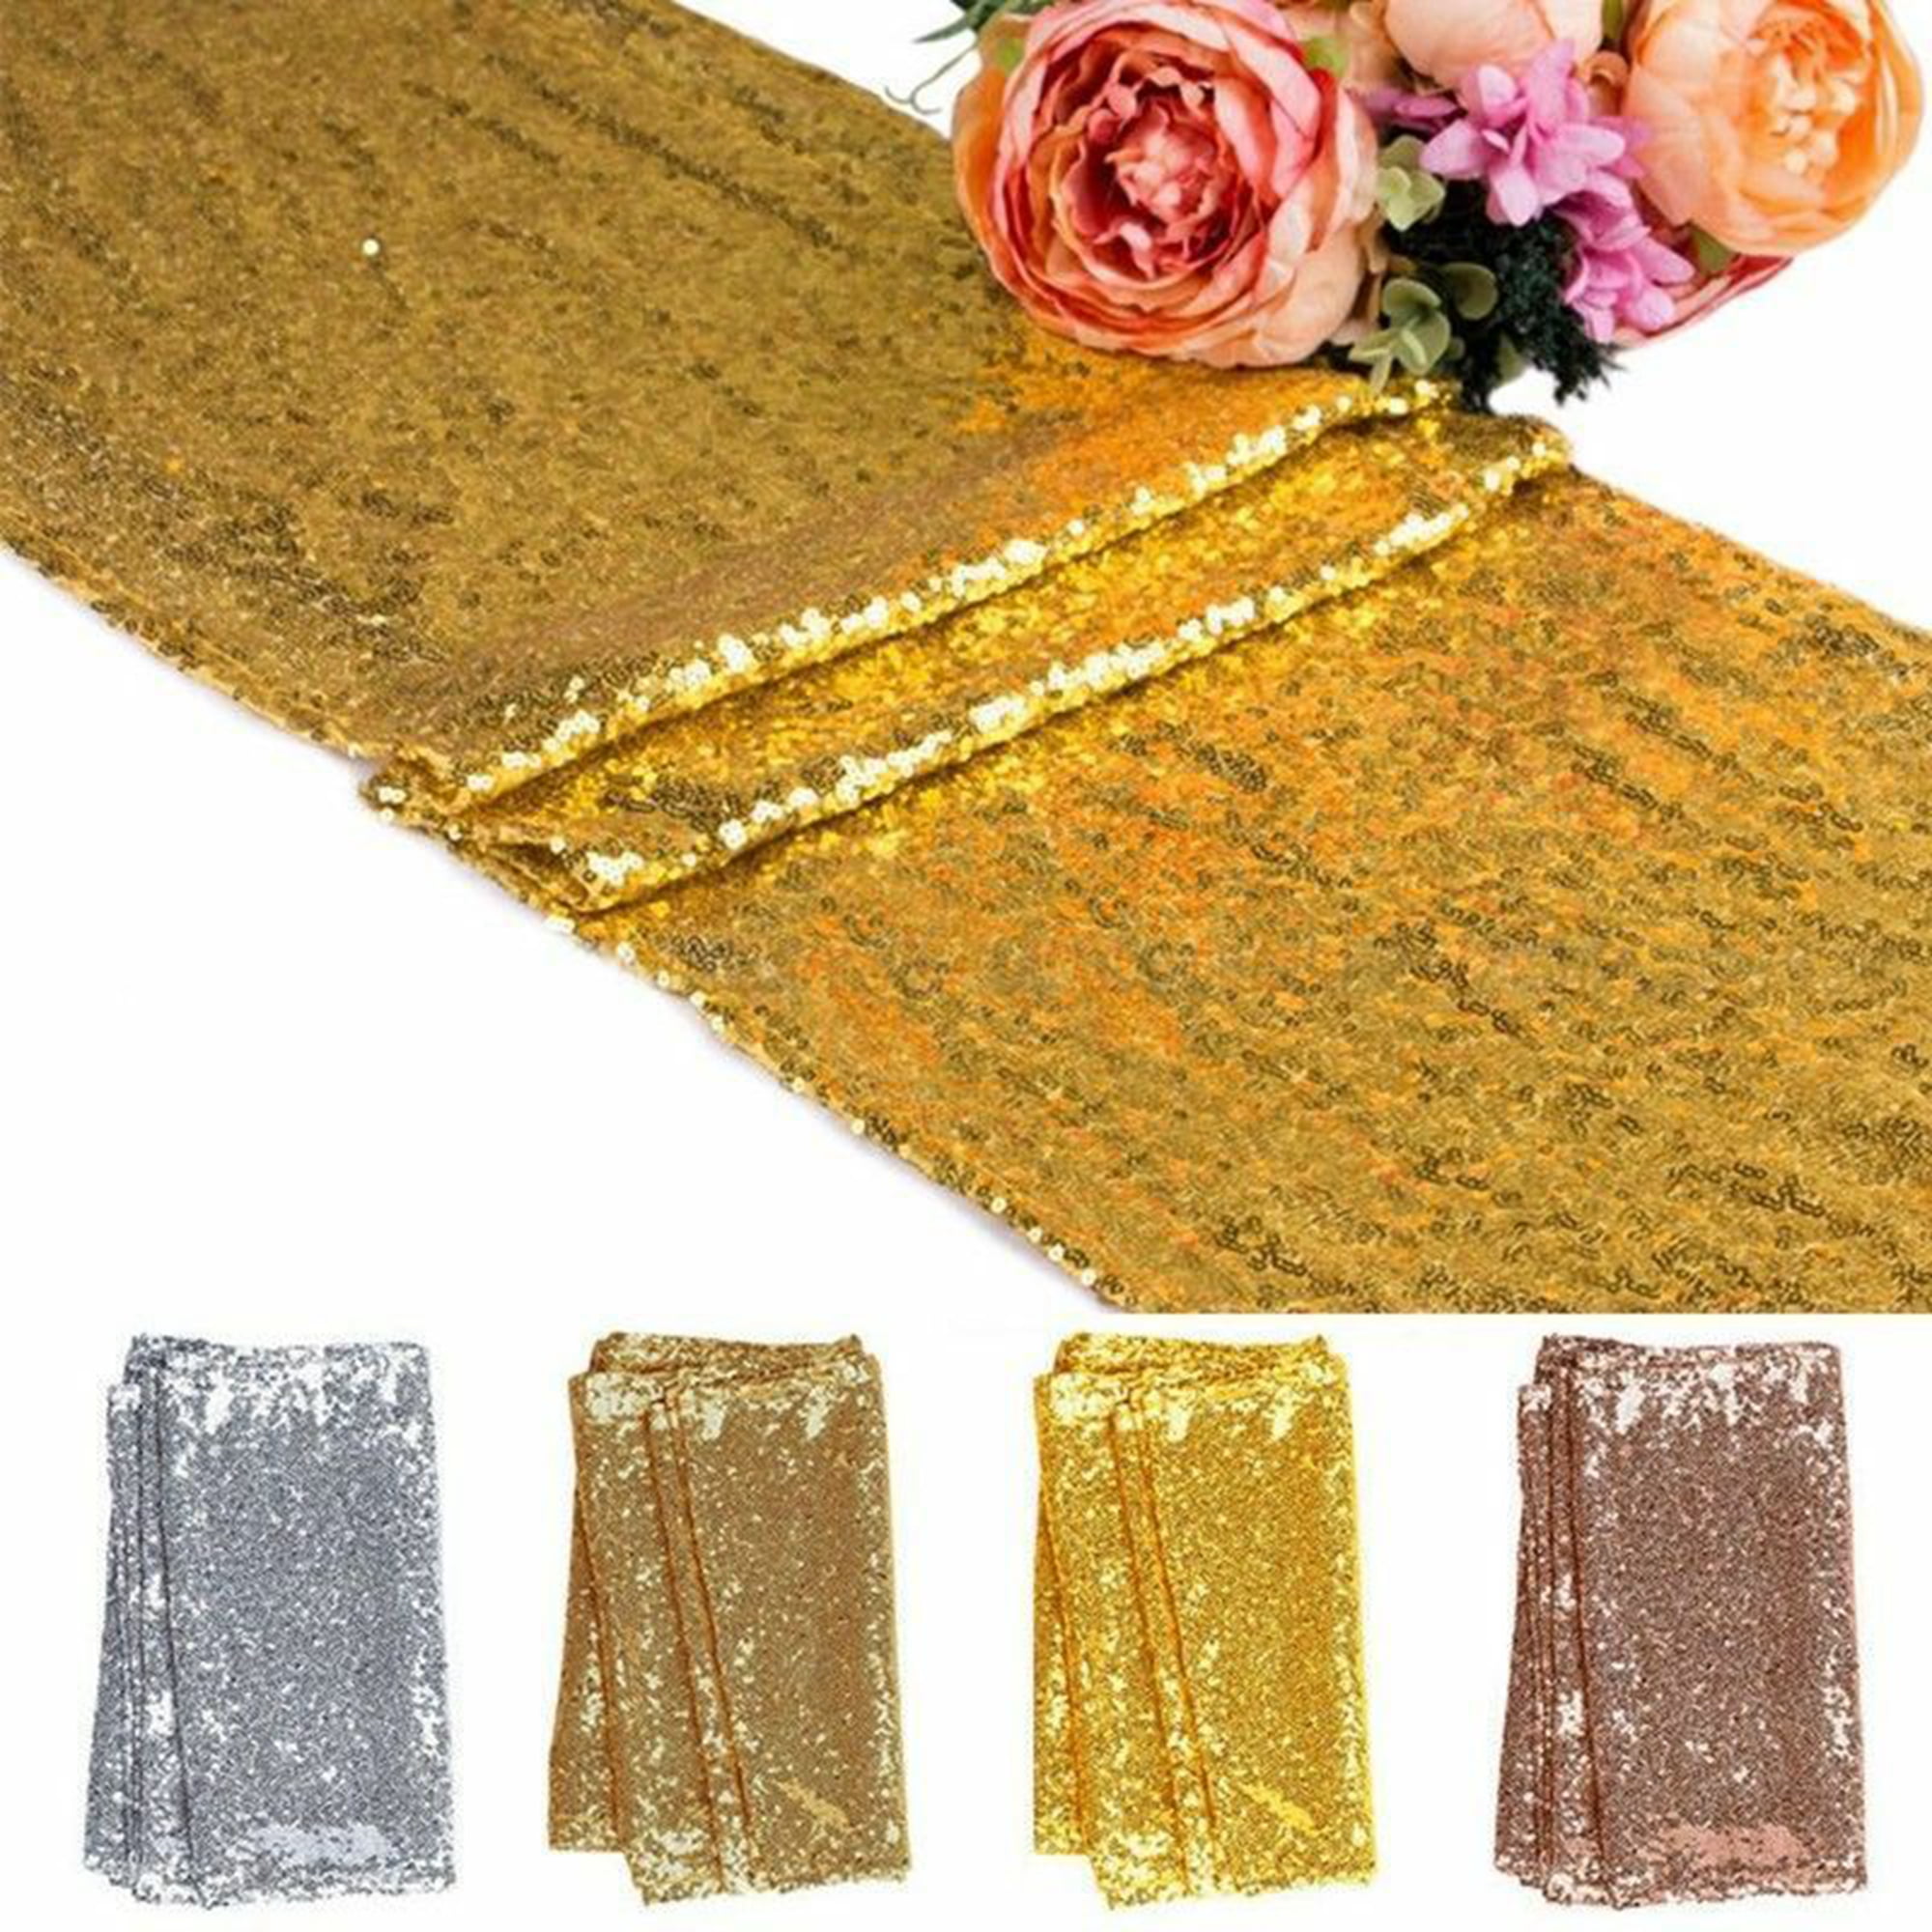 Details about   Glitter Sequin Table Runner Cloth Rose Gold/Silver Wedding Christmas Party Decor 